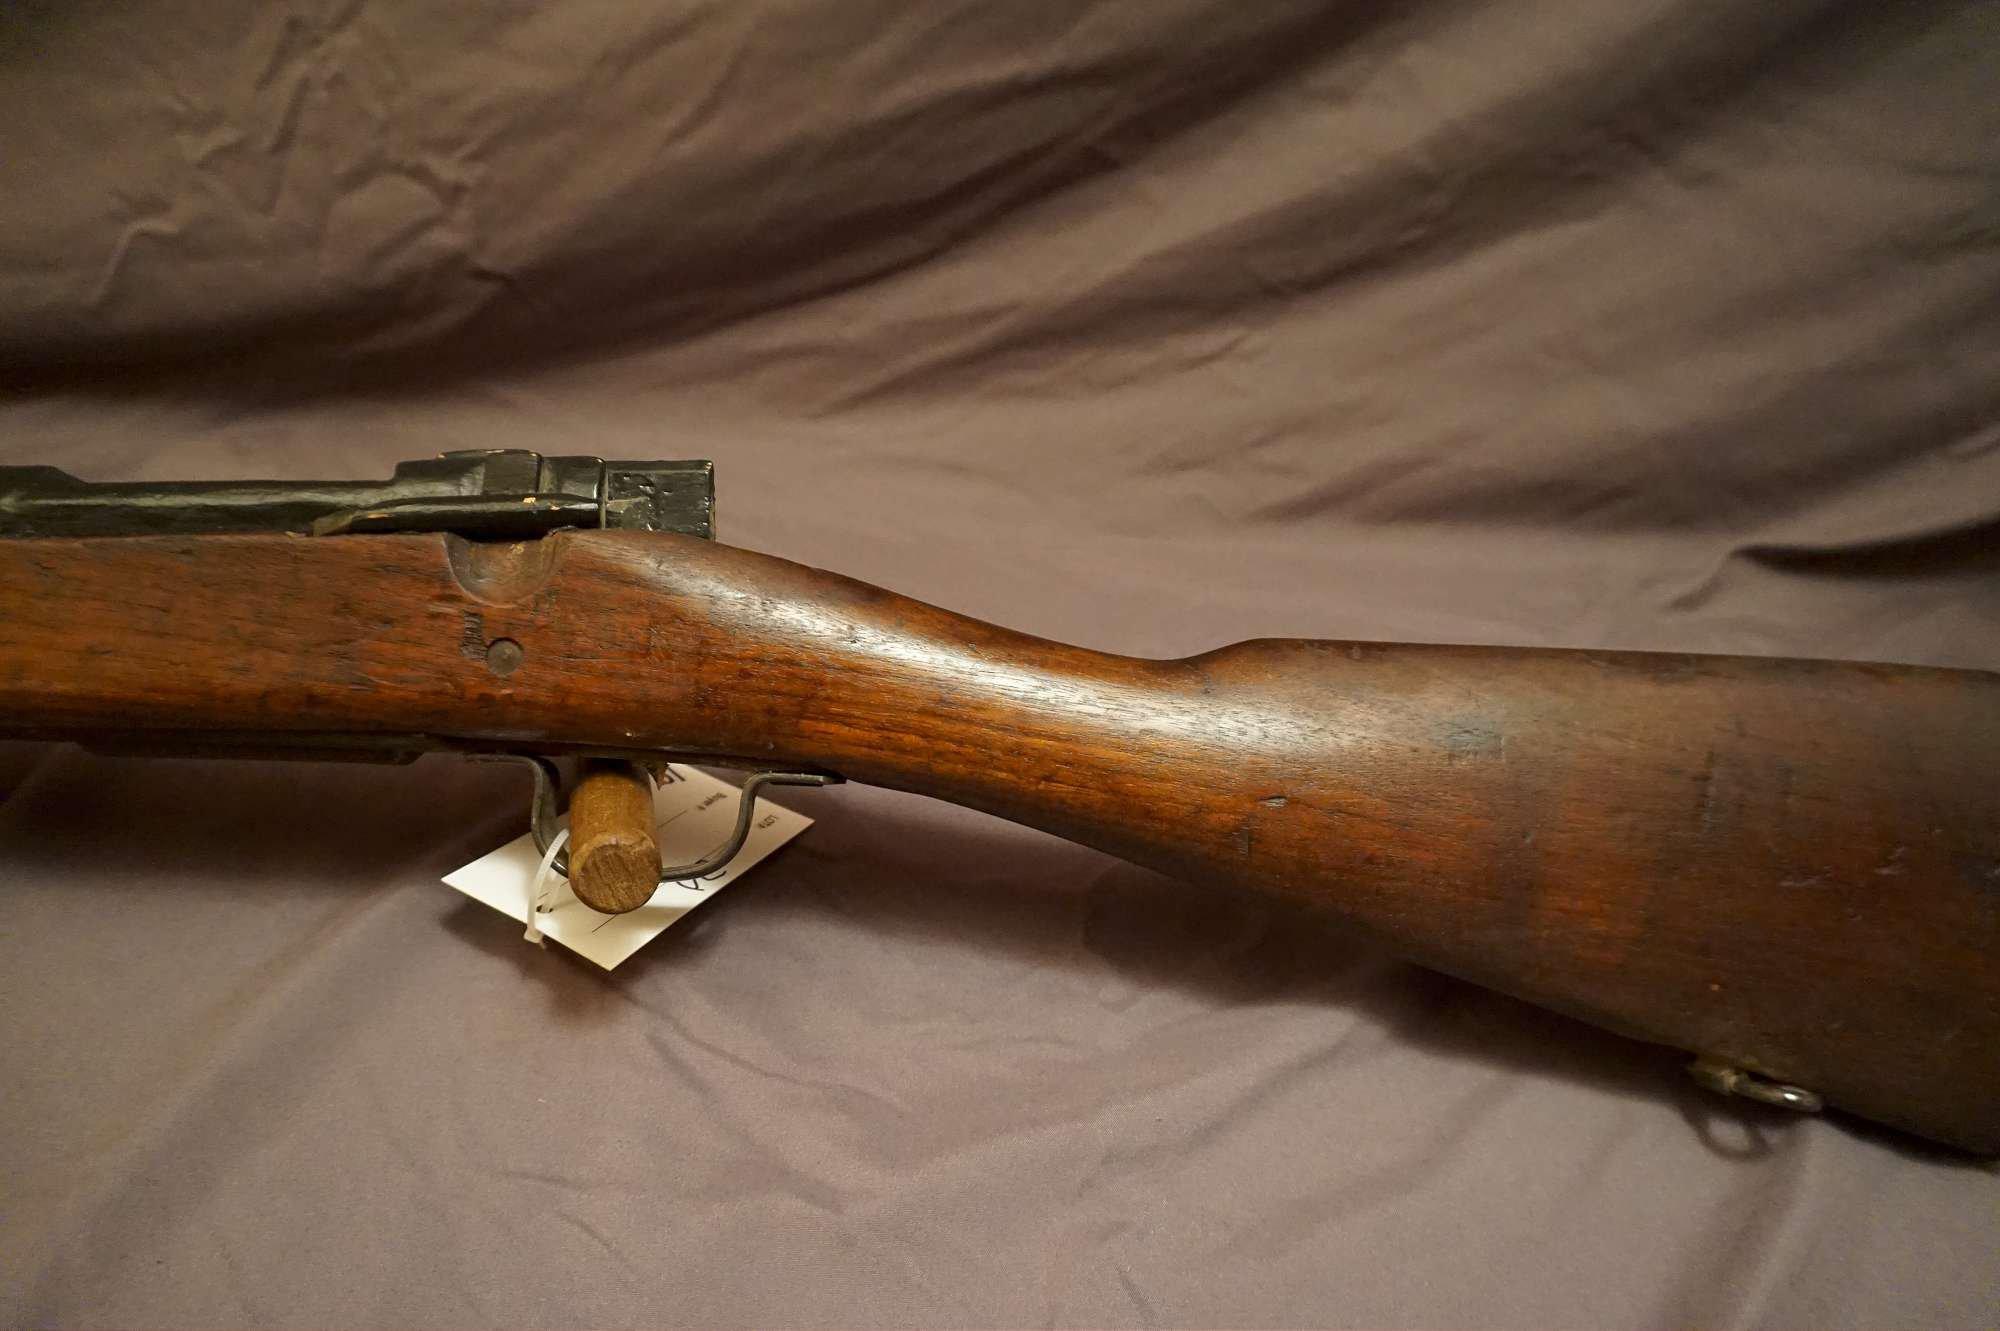 All Wooden 1903-A3 Training Dummy Rifle